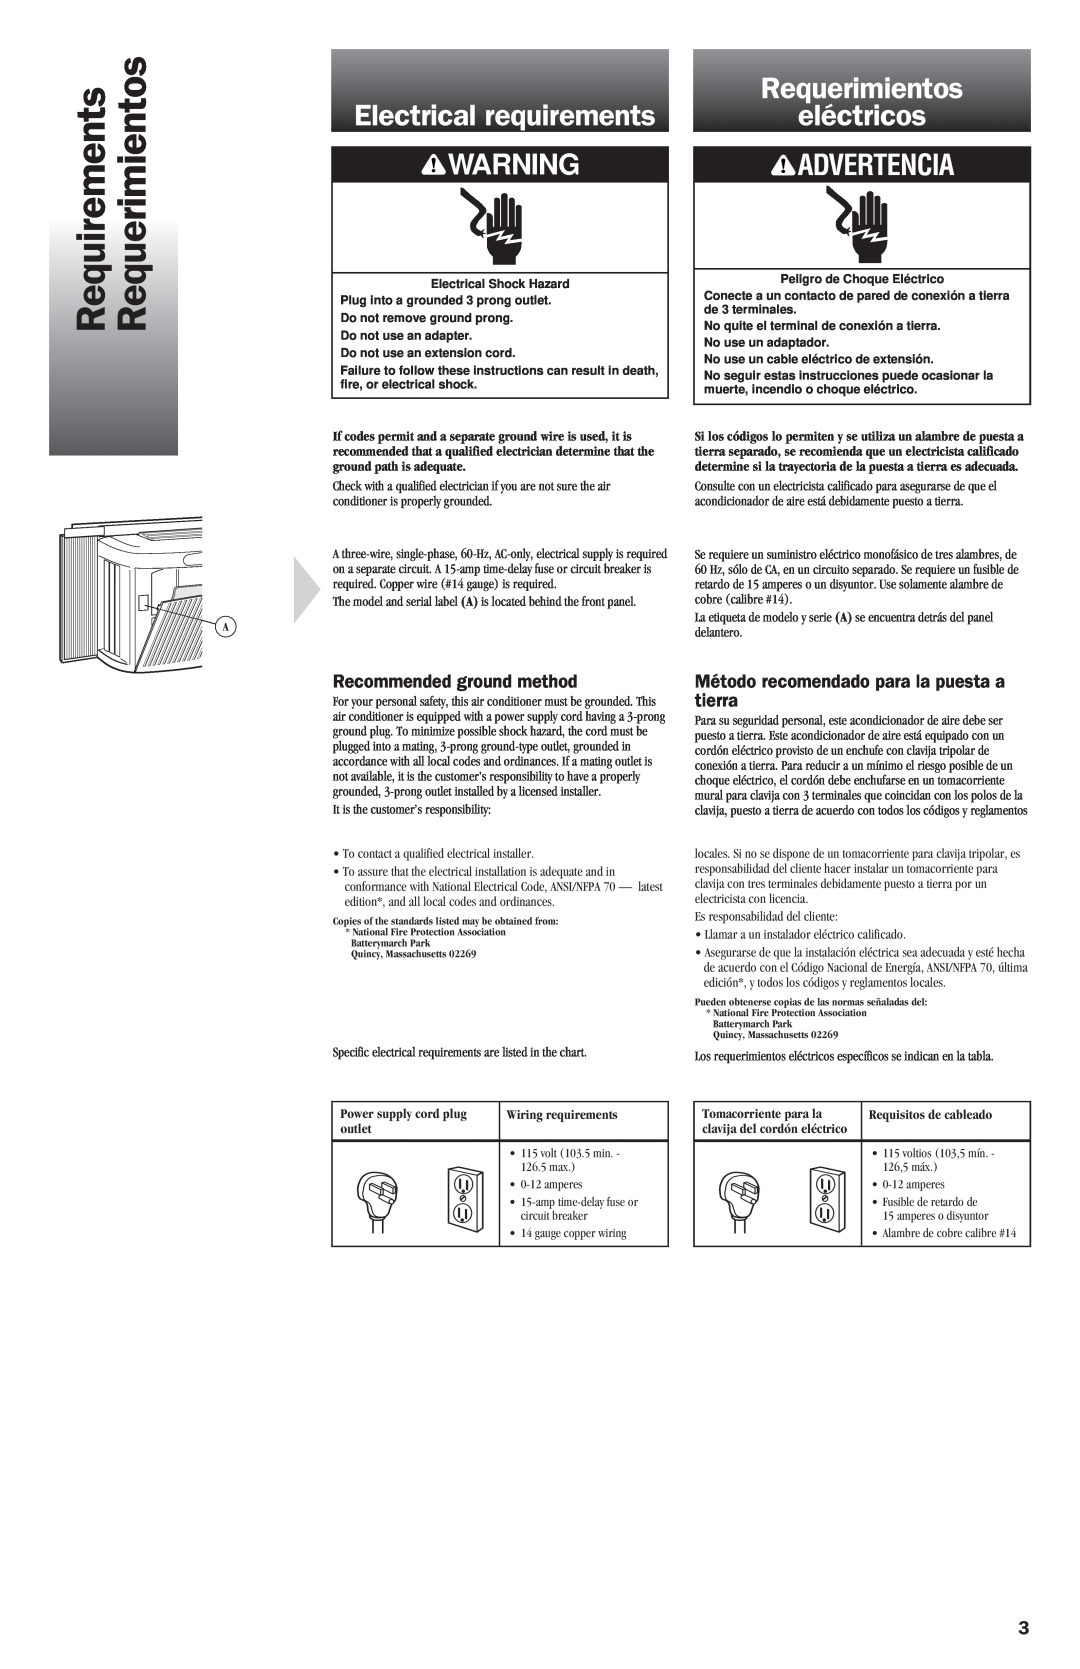 Whirlpool ACG052XJ0 manual Requirements, Requerimientos, Electrical requirements, eléctricos, Recommended ground method 